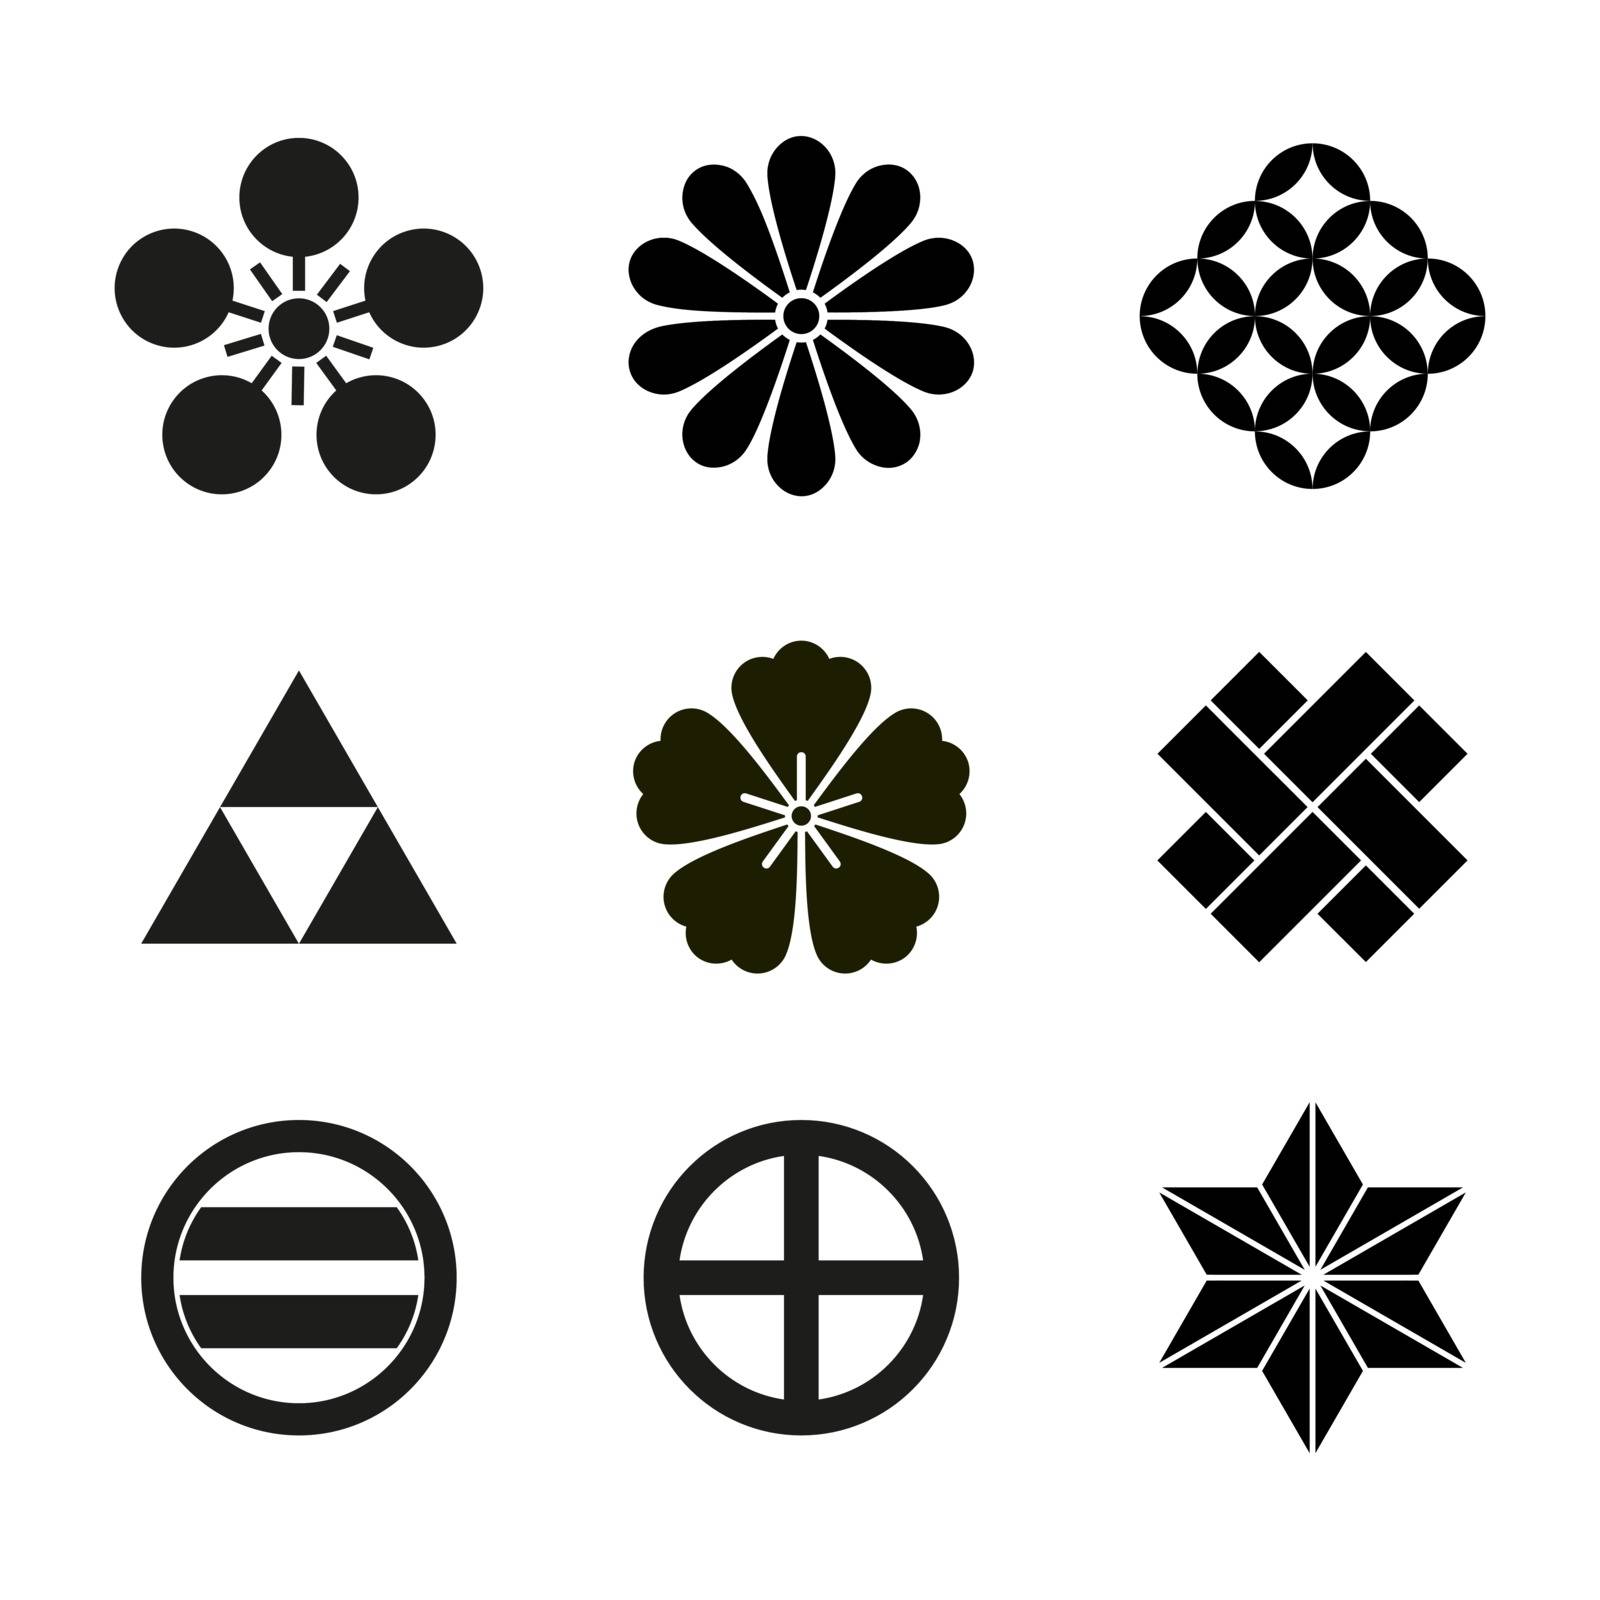 Japanese Signs symbols set or collection on white by infinityyy